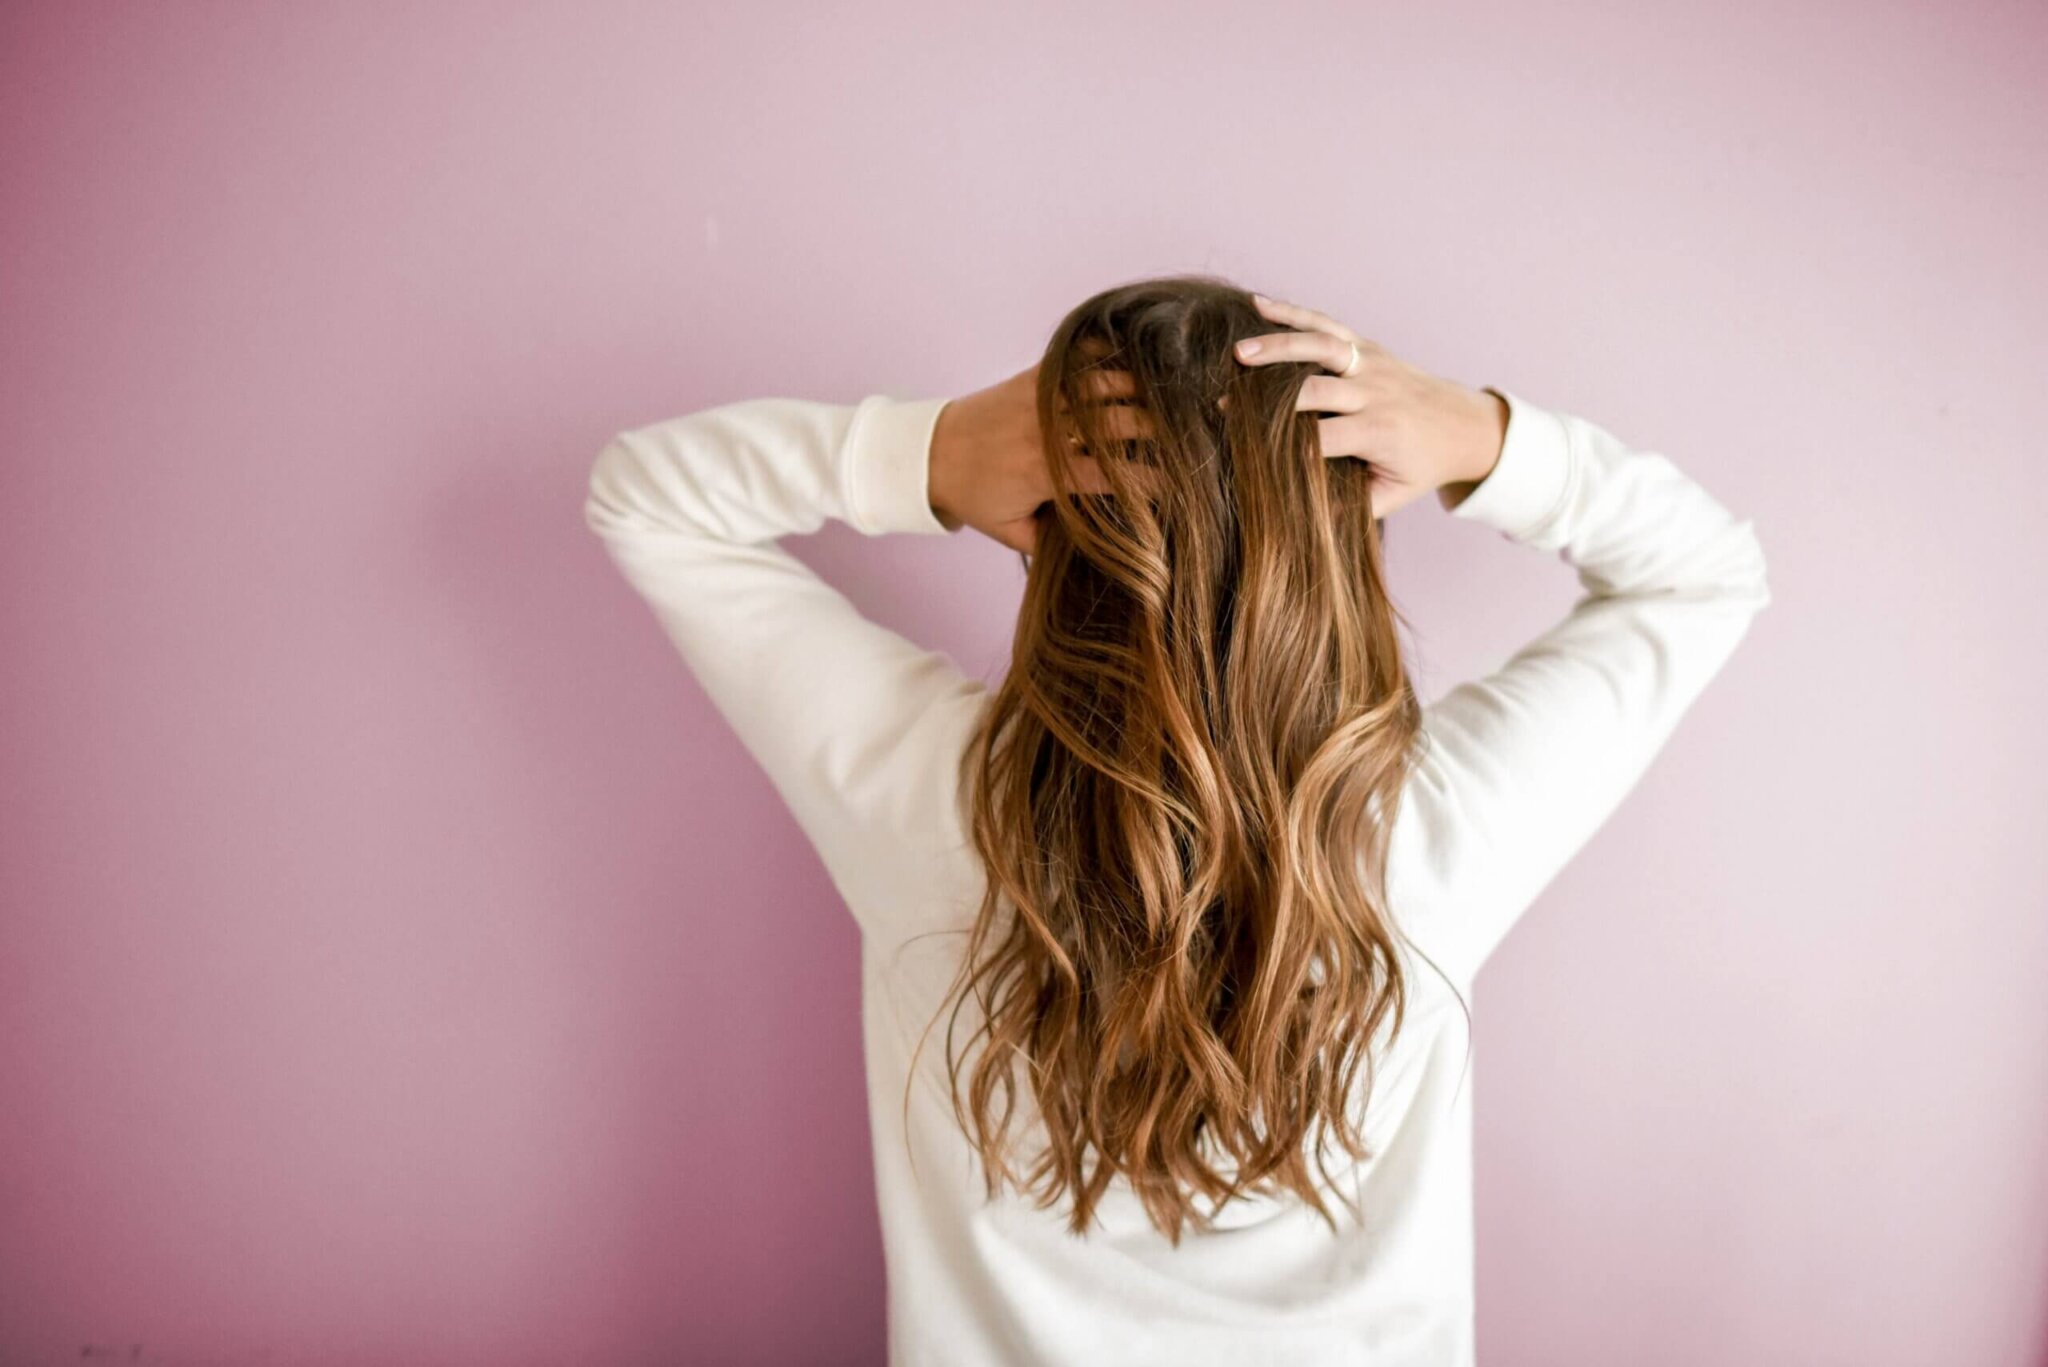 Woman with her back to camera running hands through her hair